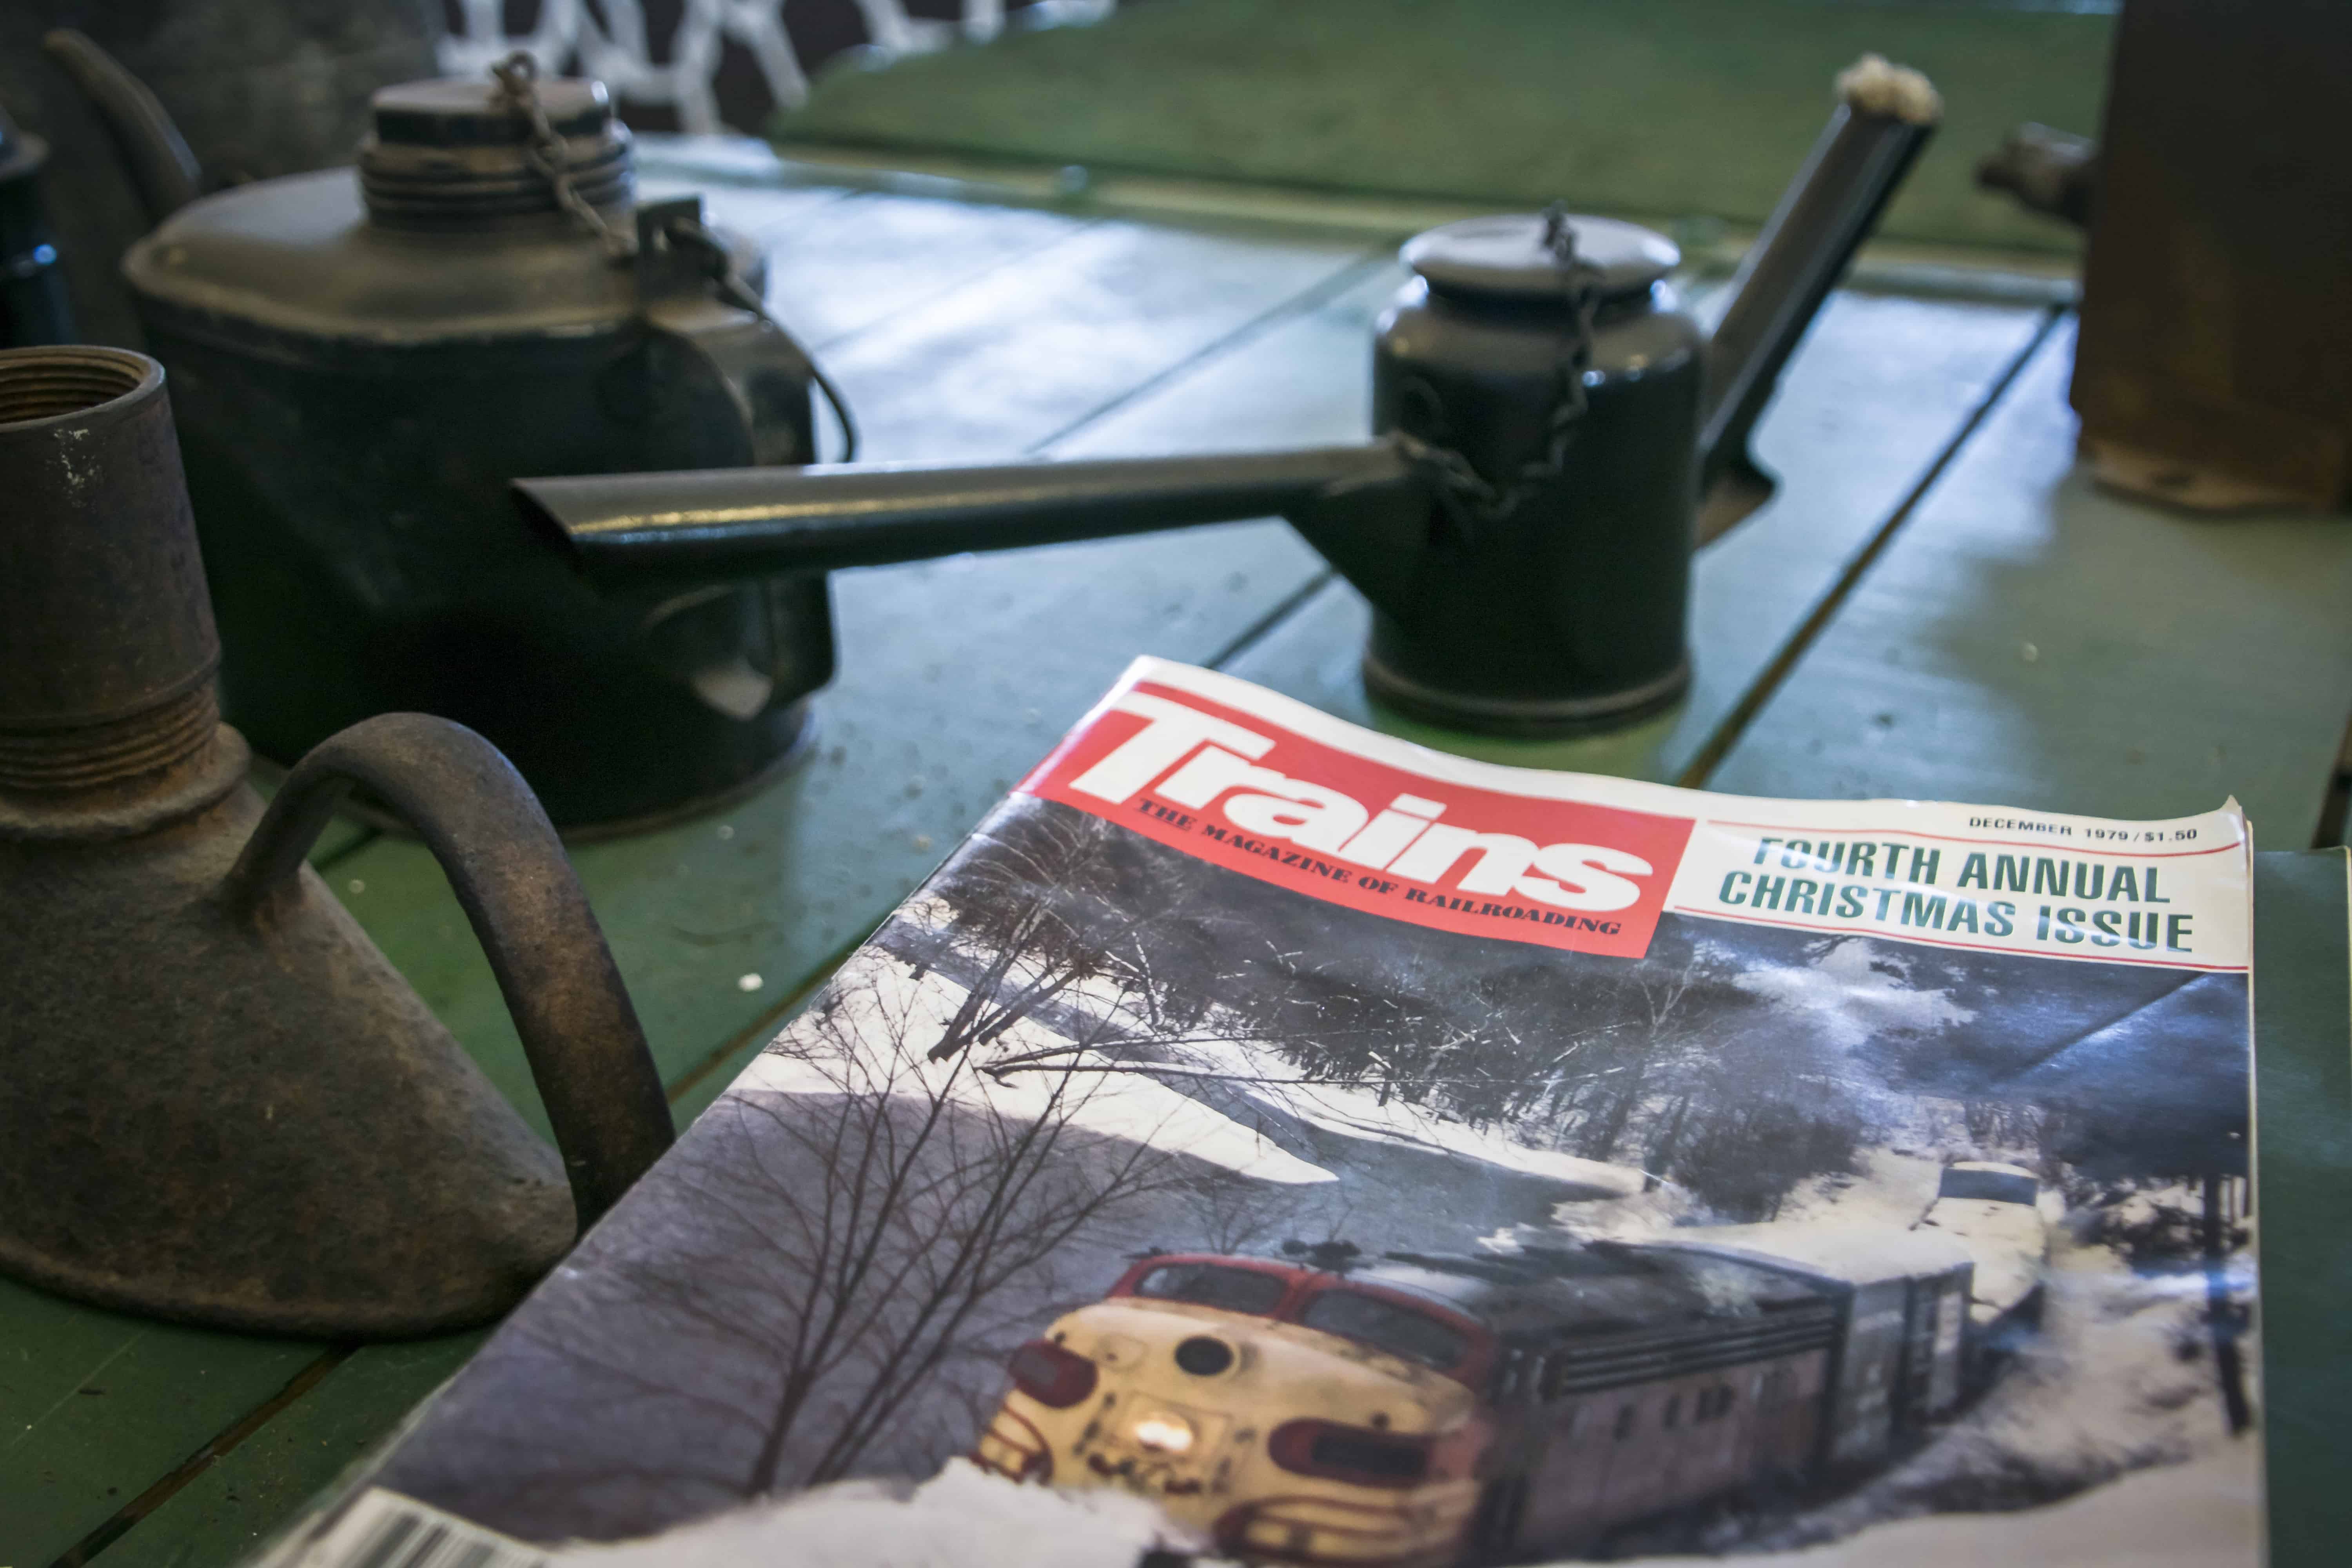 Meridian Railroad Museum-Work Area and Magazines